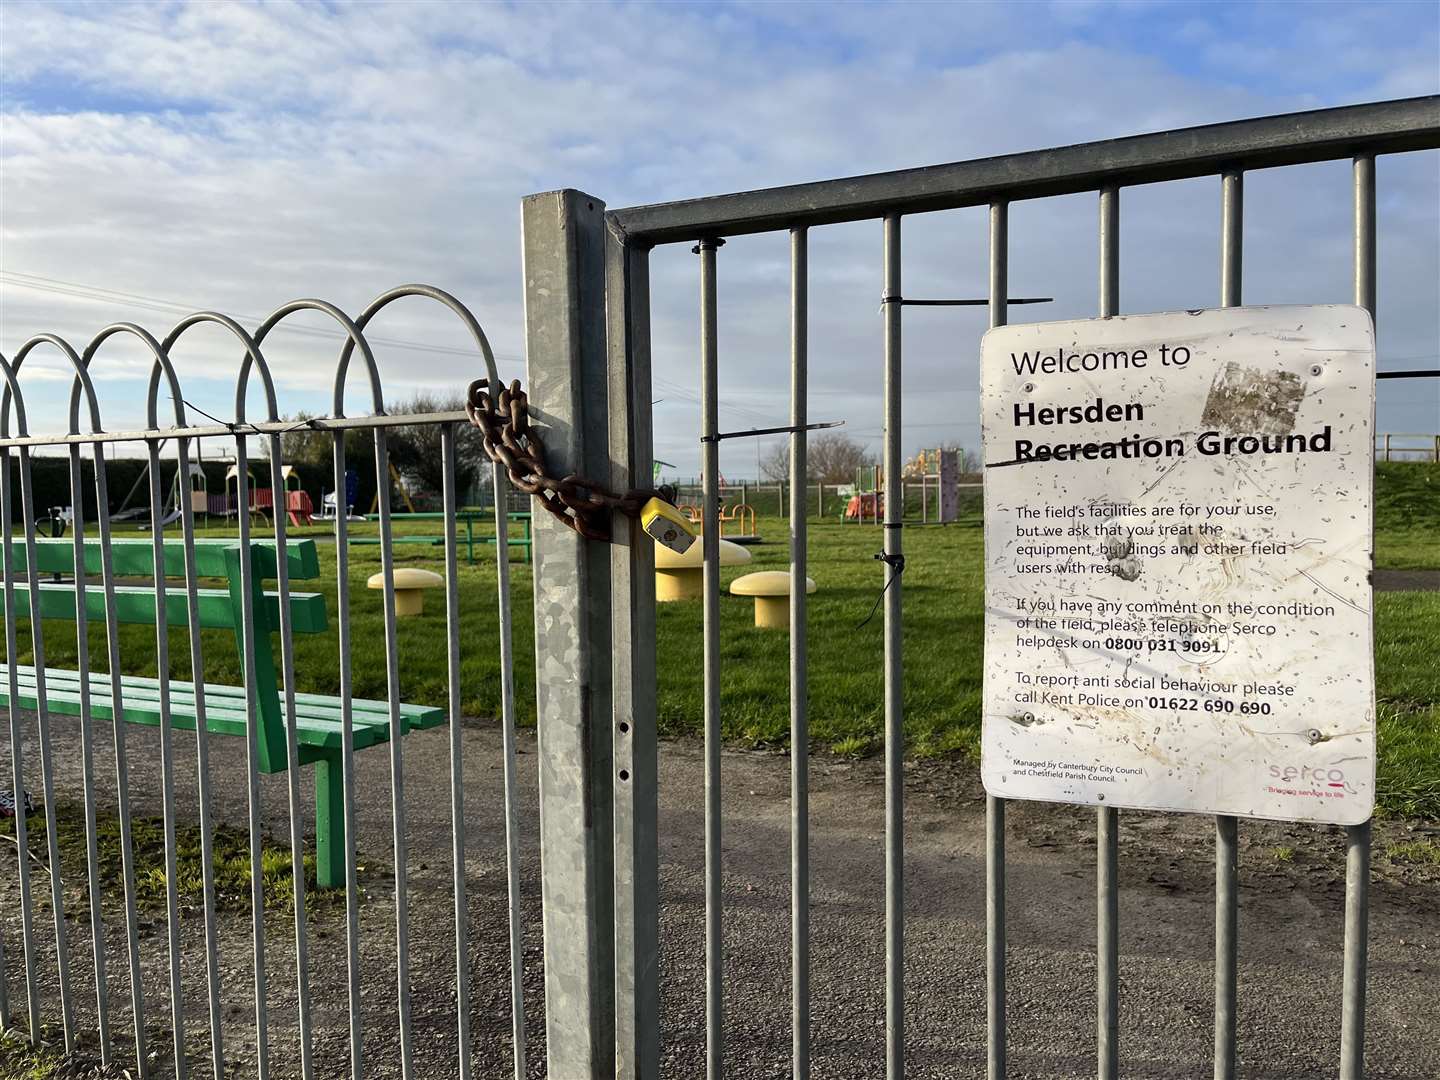 The play park in Hersden has been closed since September last year